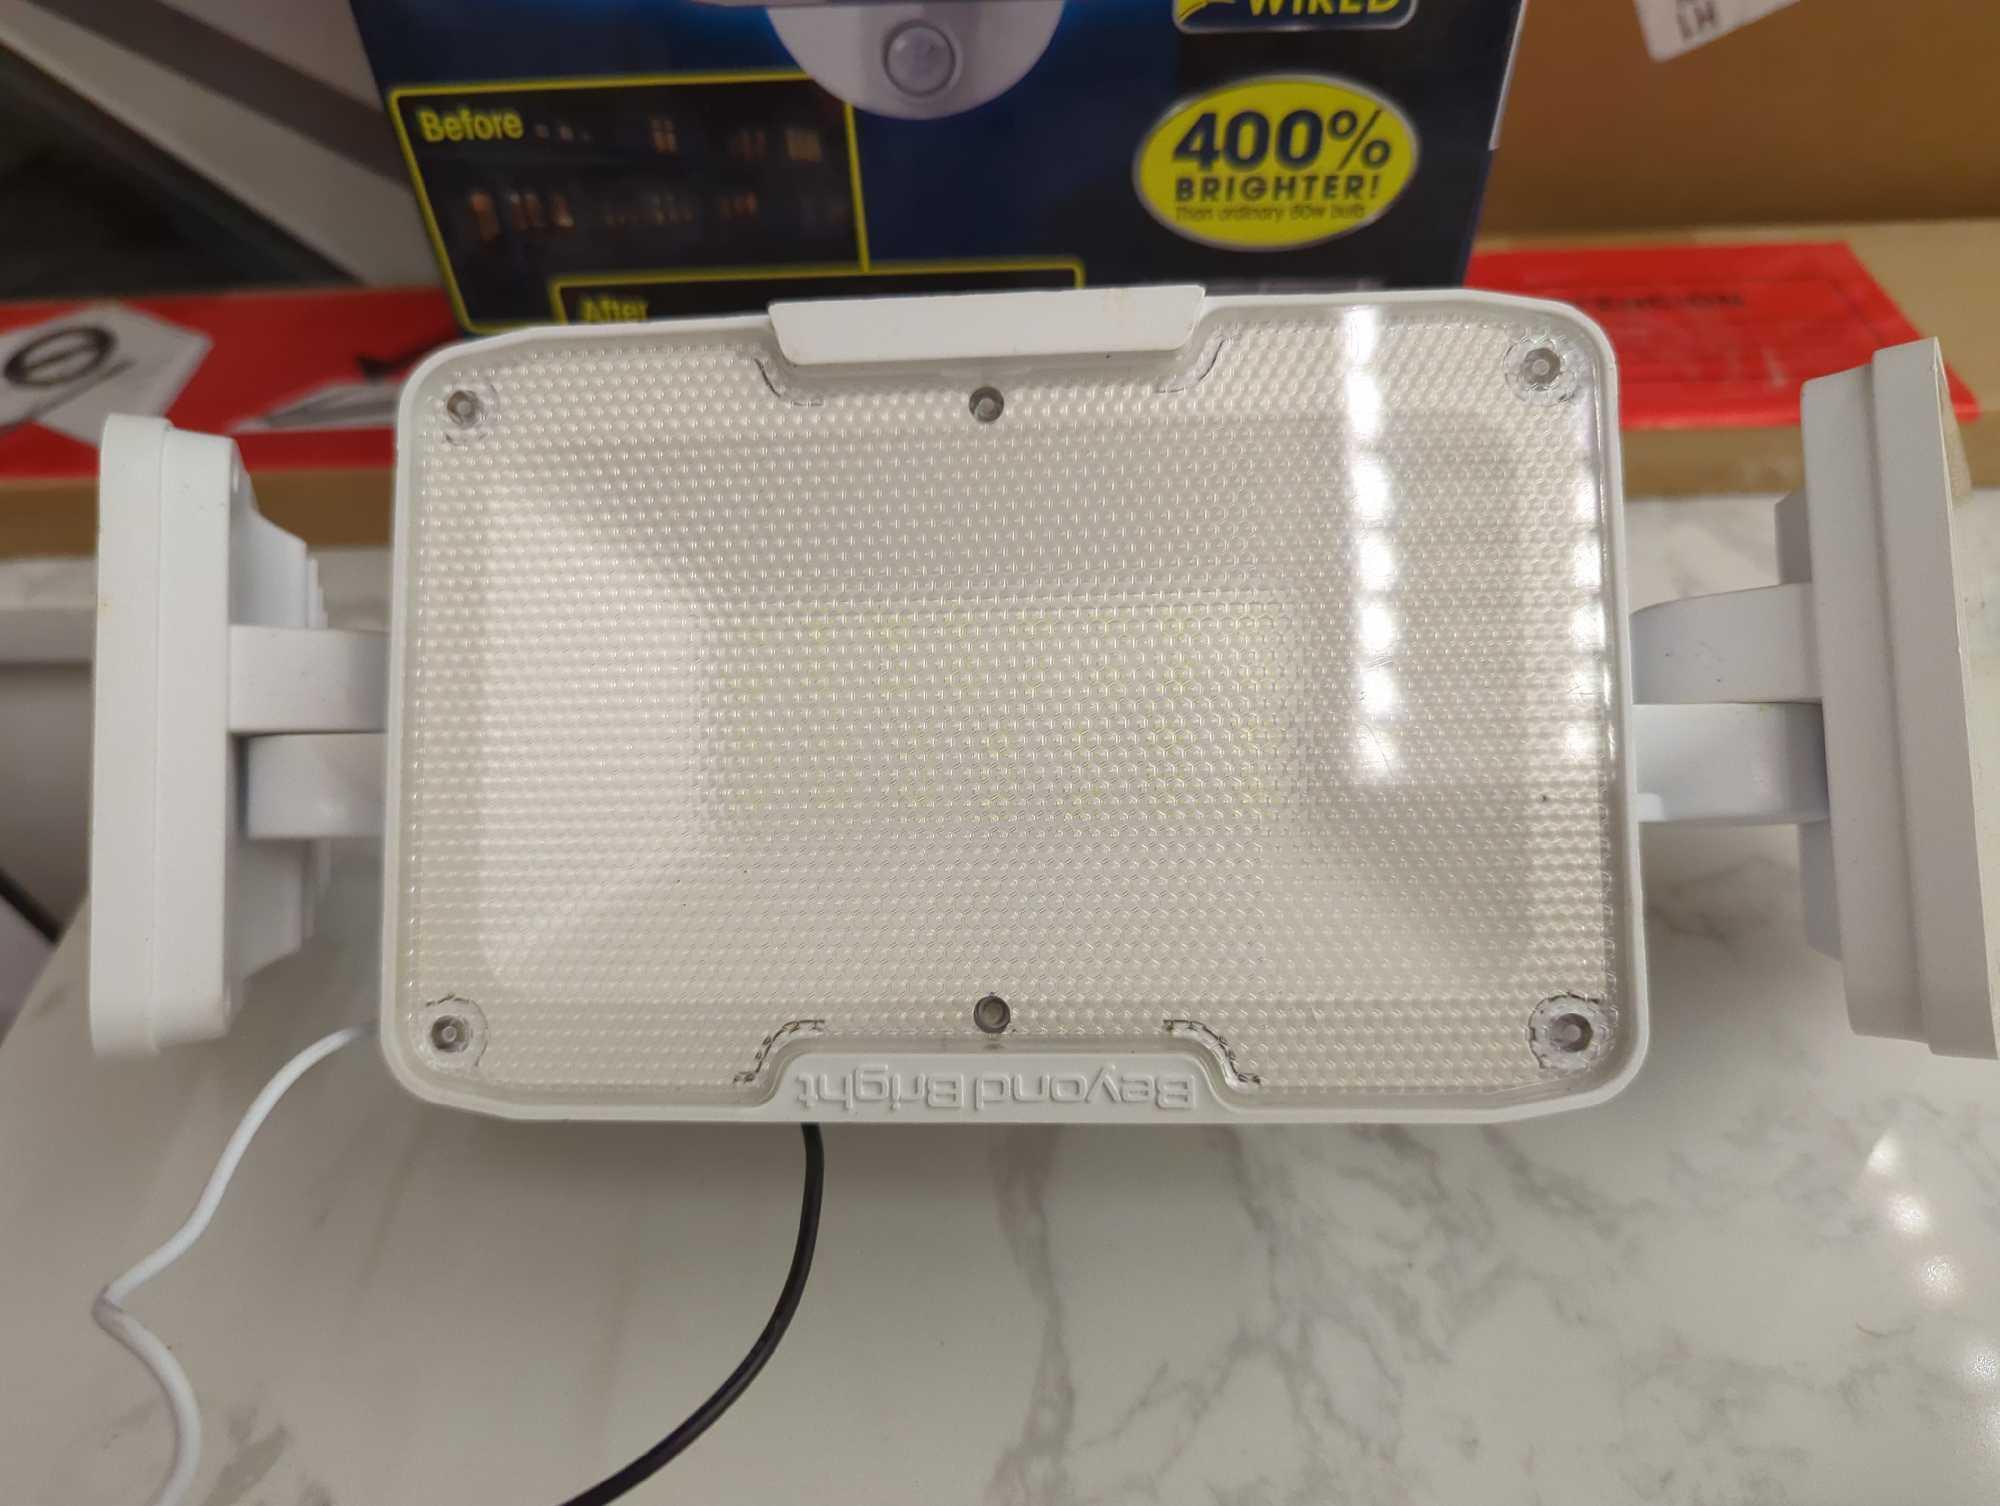 BEYOND BRIGHT Hardwired Black Motion Sensing LED Landscape Flood Light. Comes in open box as is